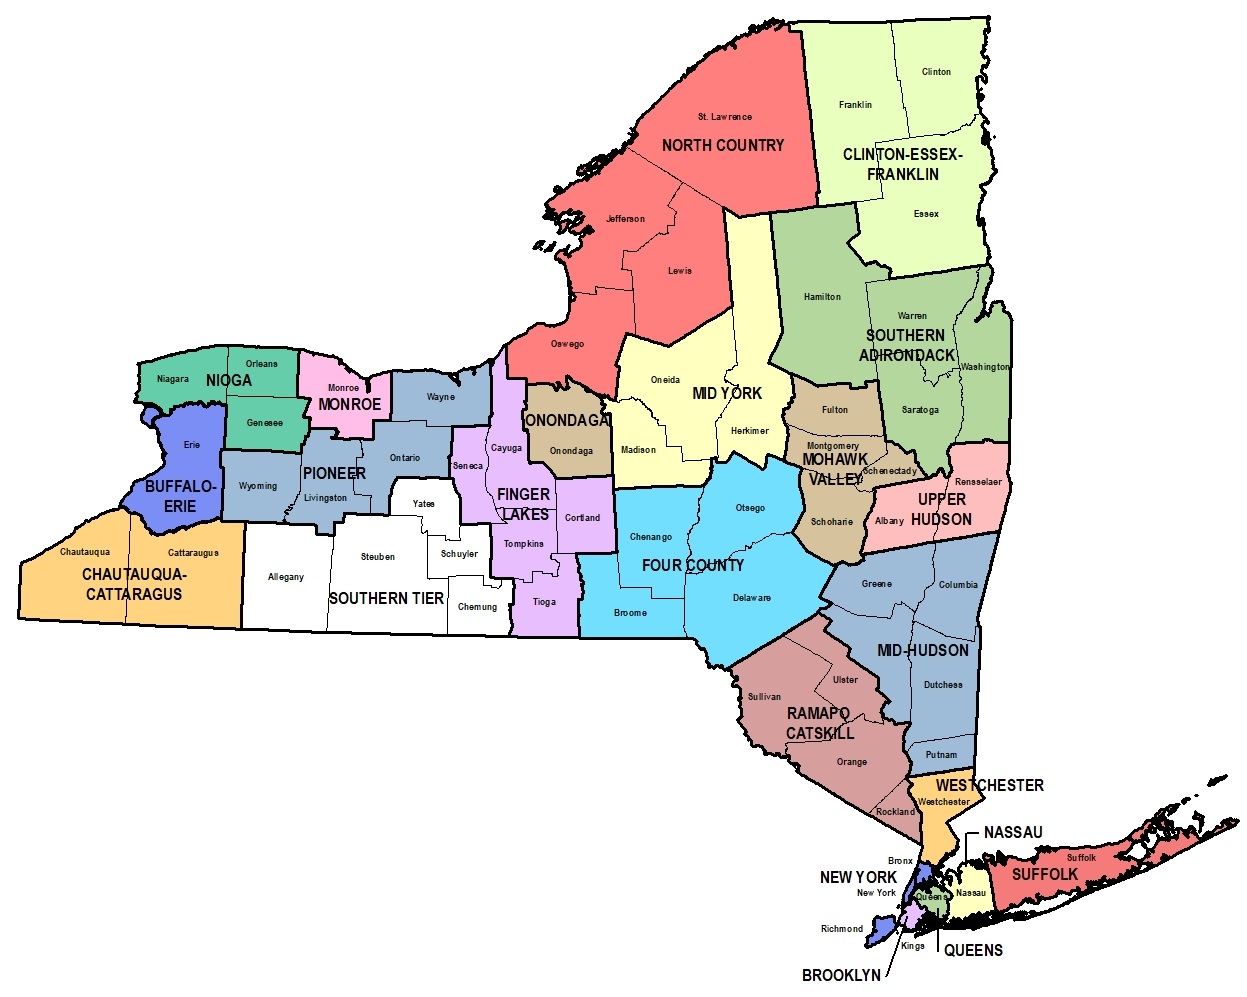 Image map of public library systems in New York State